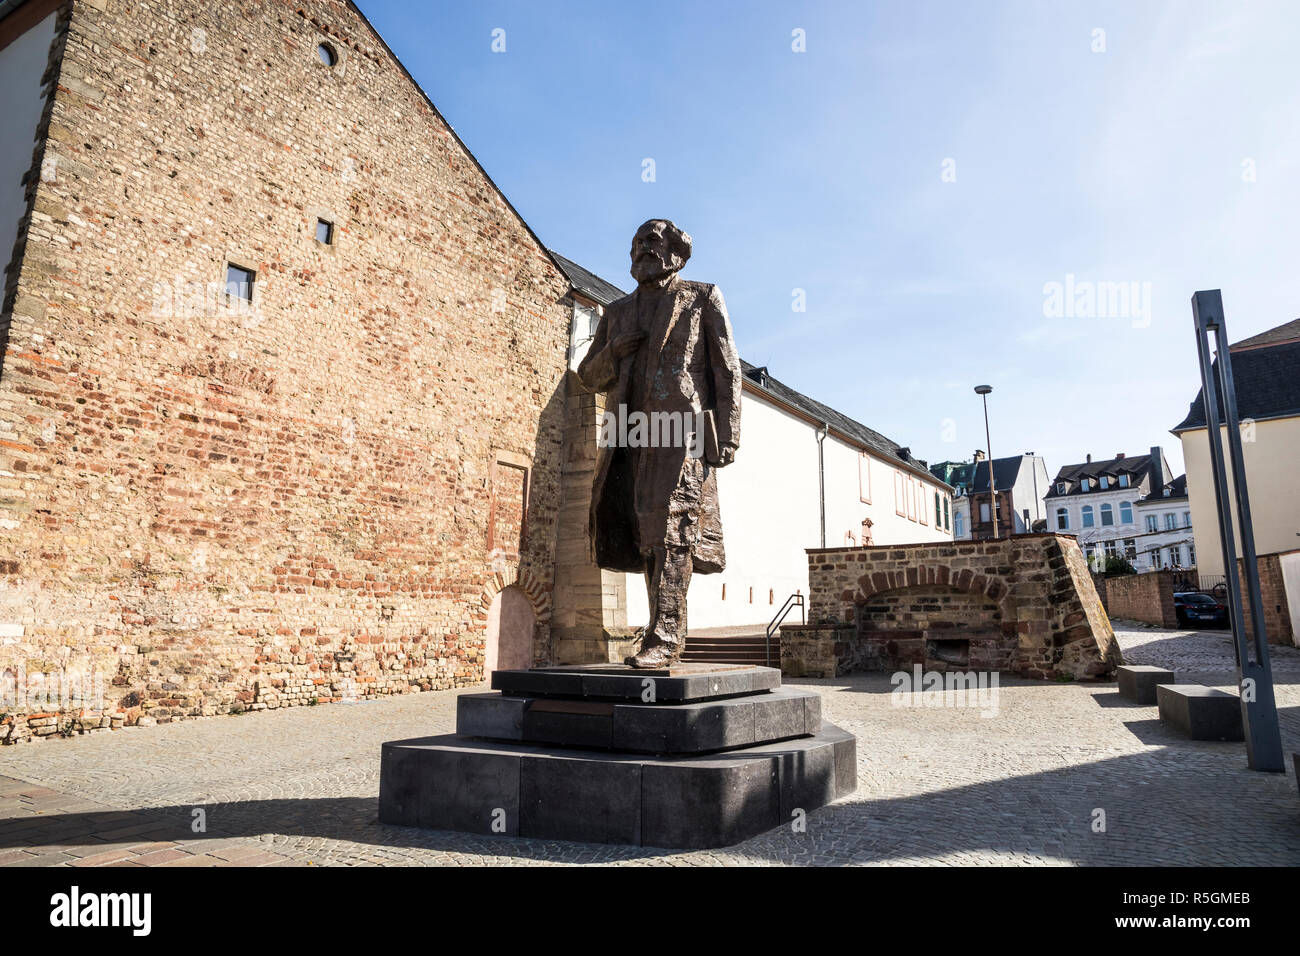 Trier, Germany. Monument to German Communist philosopher Karl Marx (born in Trier in 1818), unveiled in 2018 for 200 anniversary celebrations and made Stock Photo